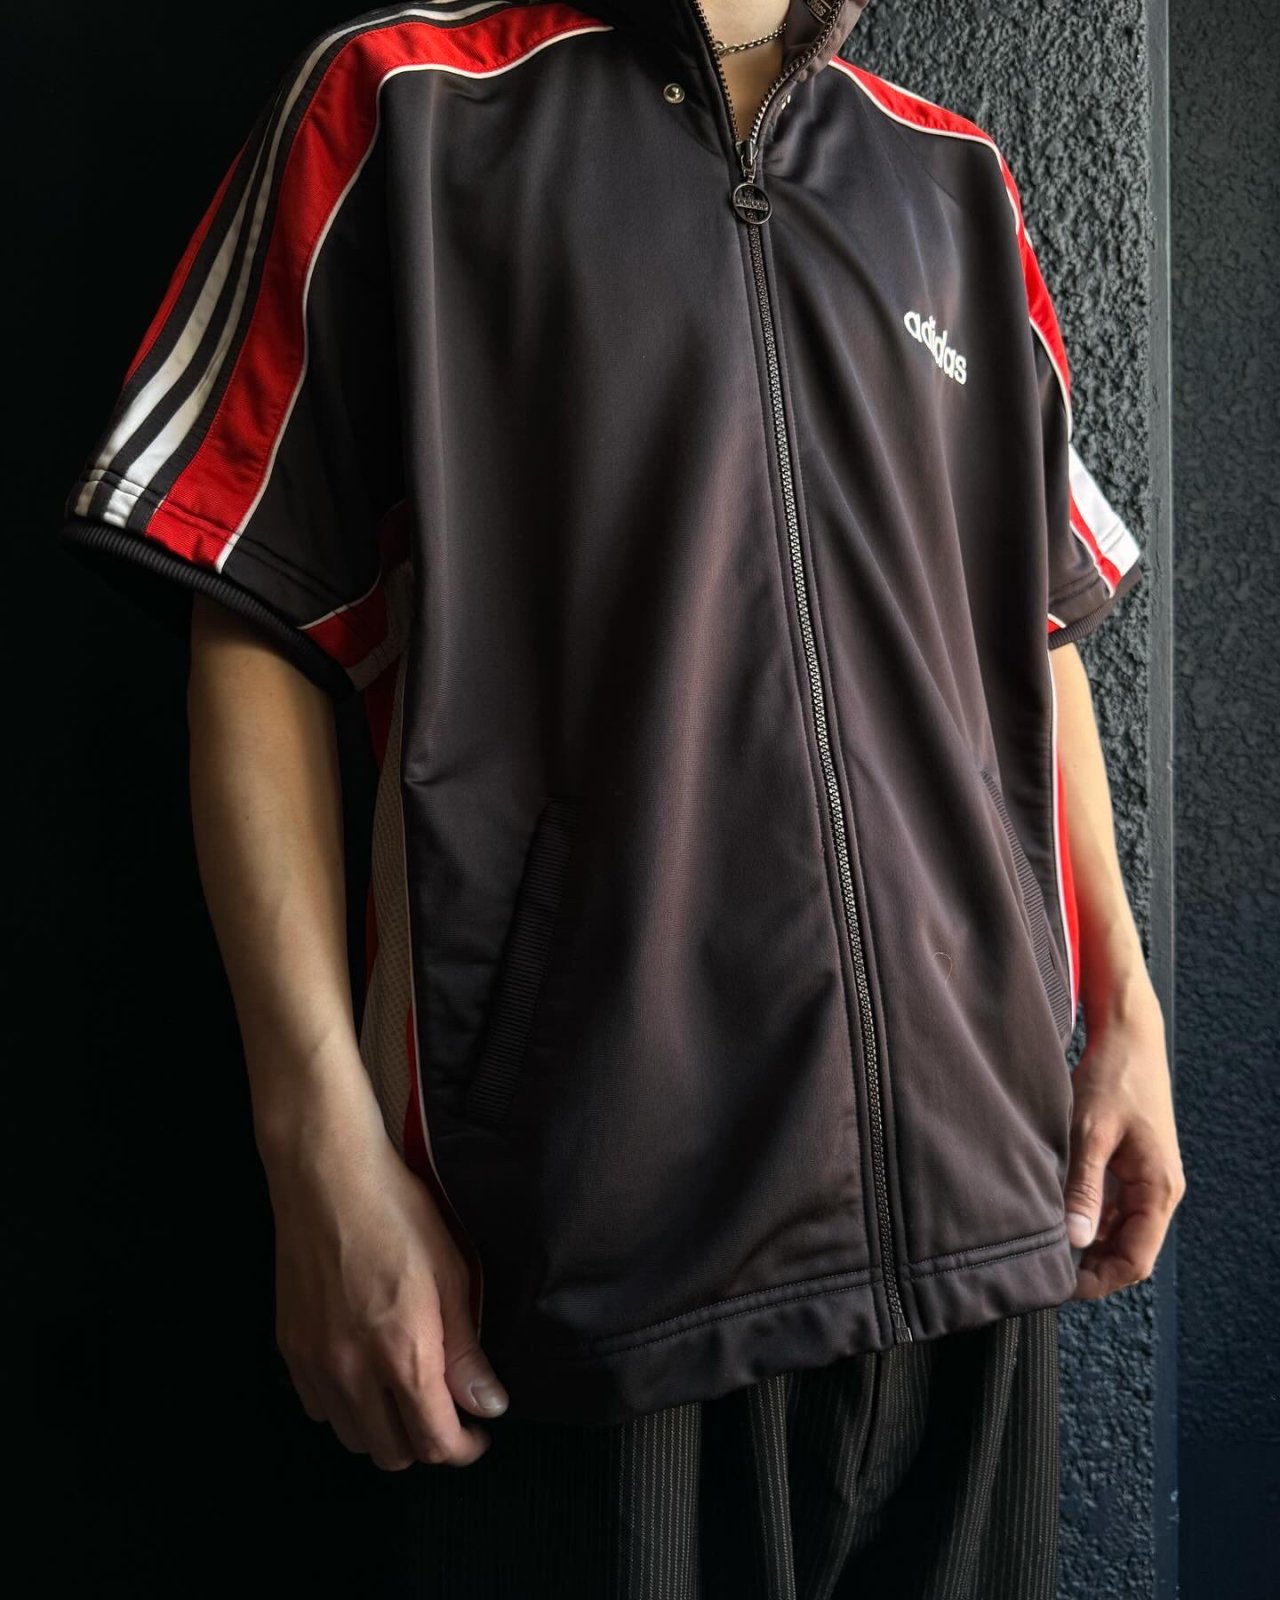 <img class='new_mark_img1' src='https://img.shop-pro.jp/img/new/icons13.gif' style='border:none;display:inline;margin:0px;padding:0px;width:auto;' />adidas jersey